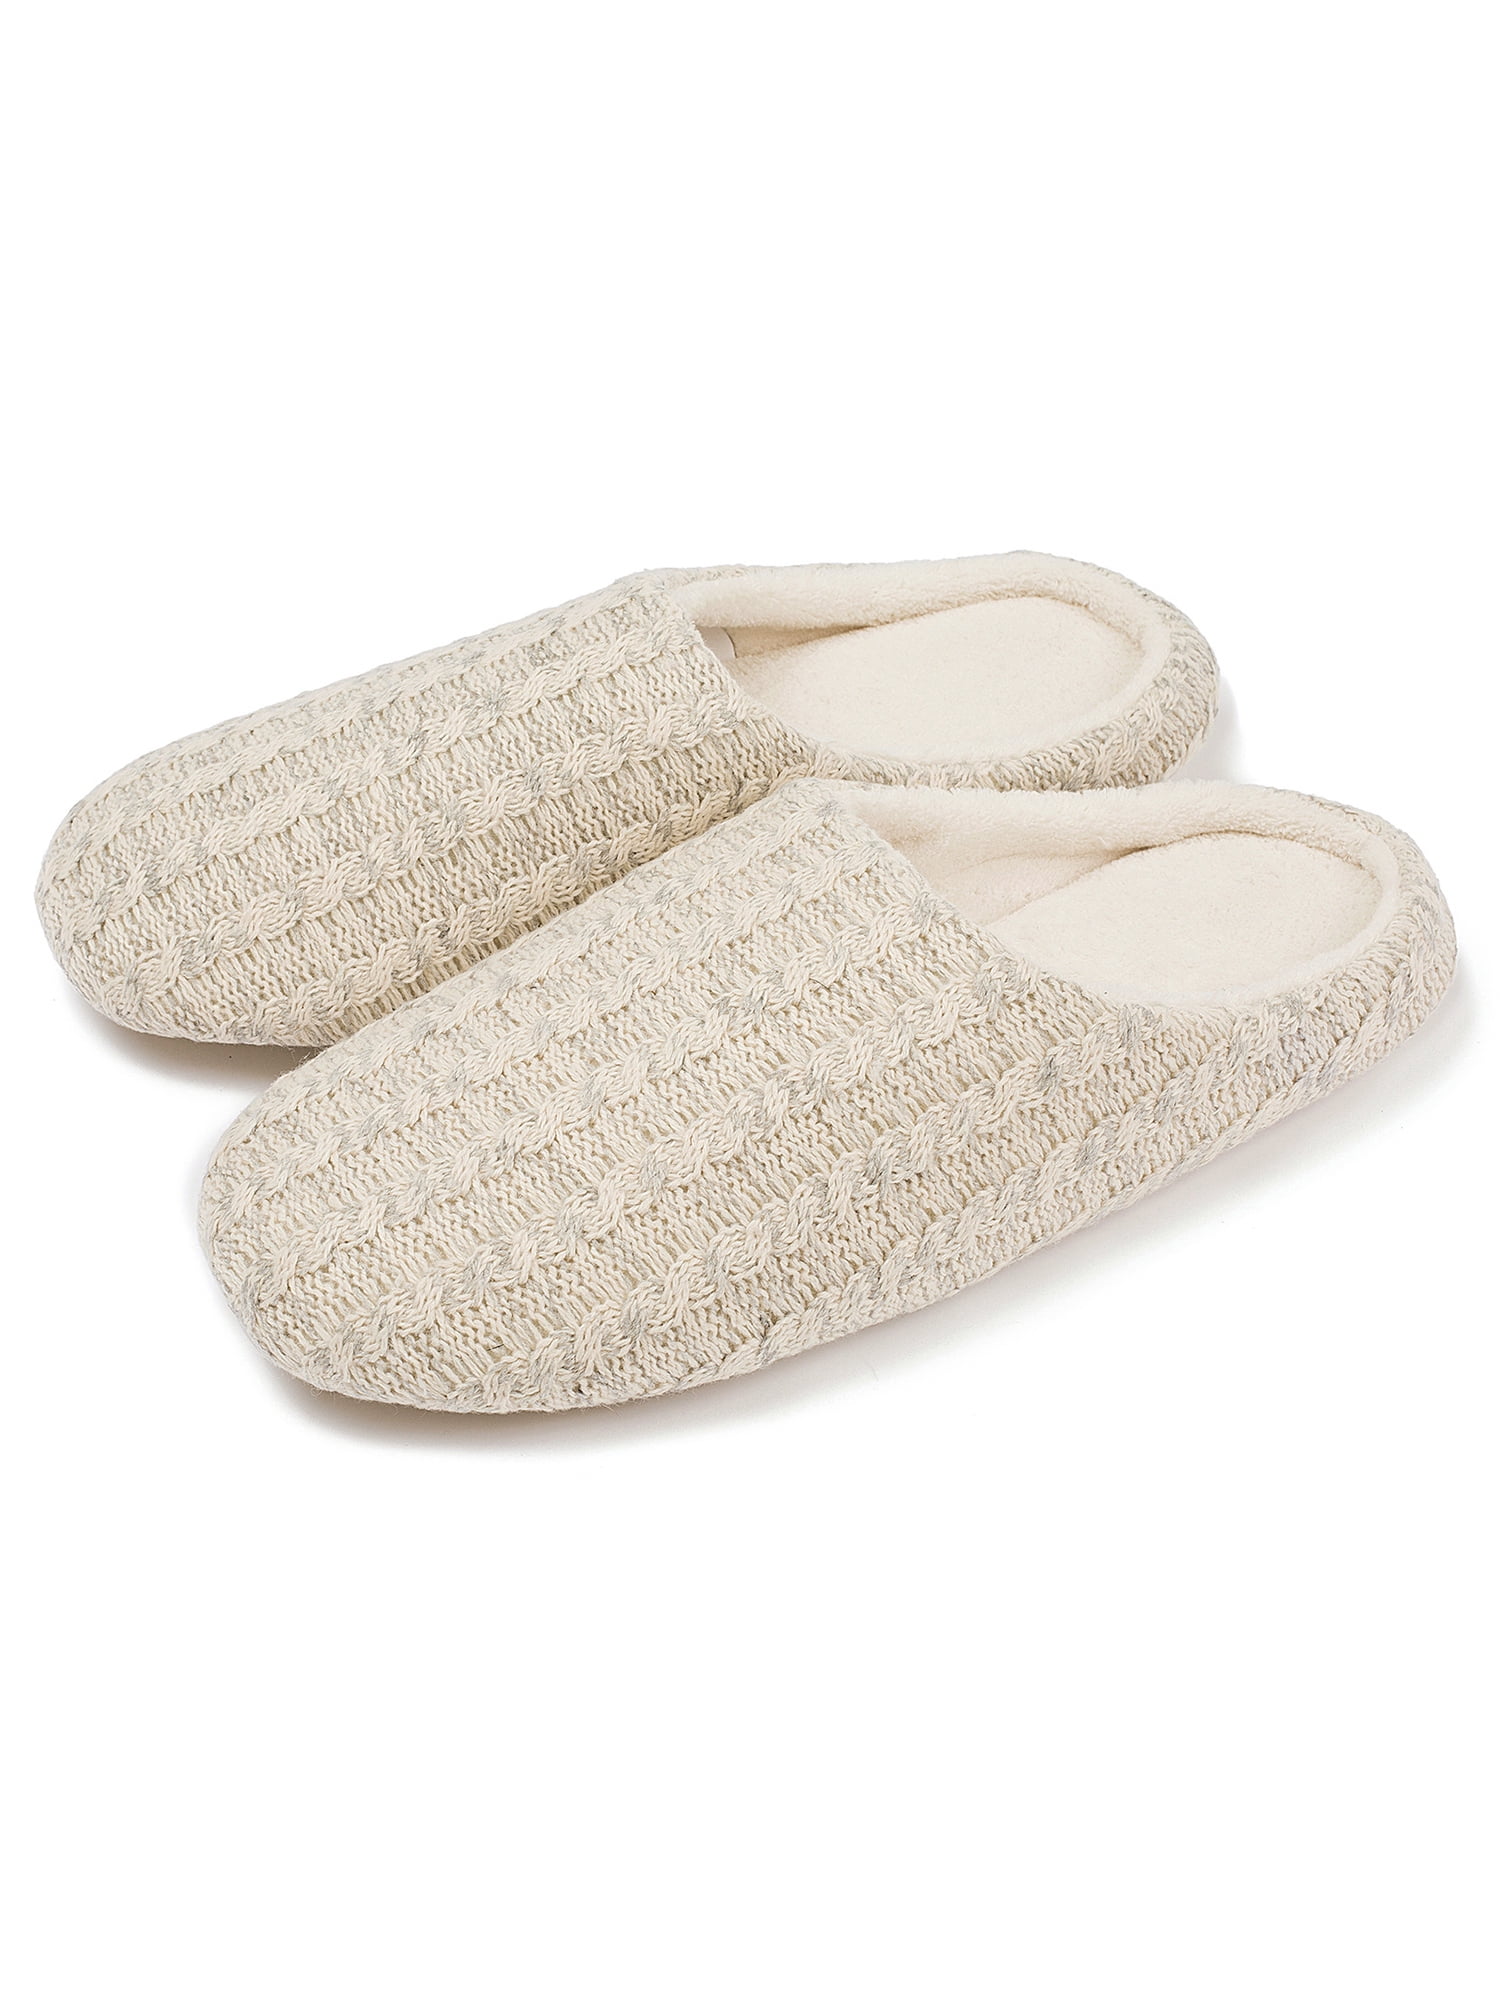 soft sole bedroom slippers